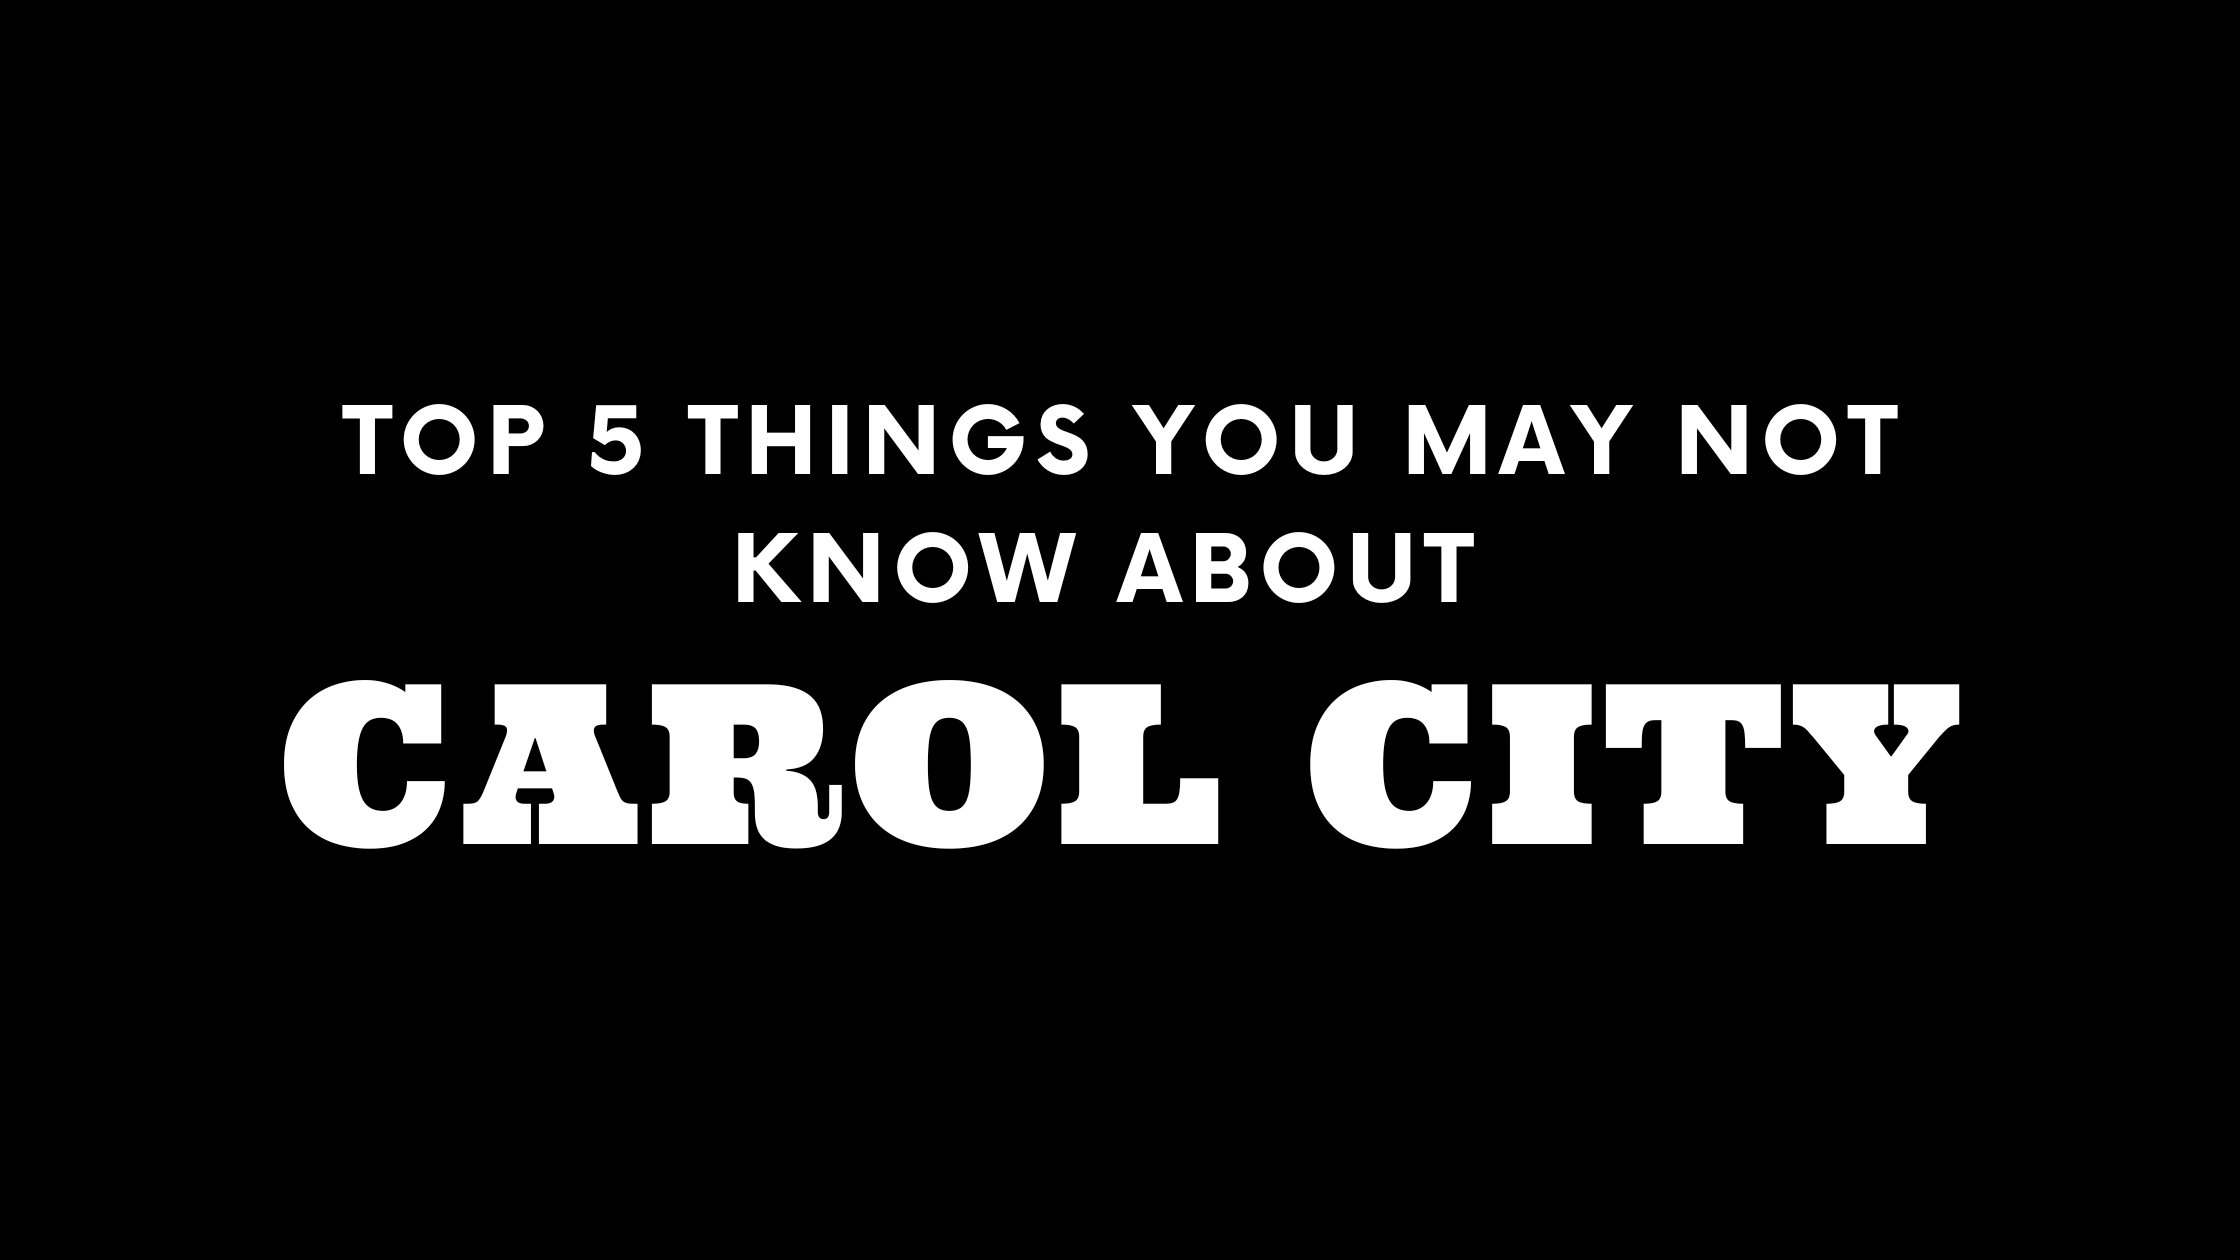 Top 5 Things You May Not Know About Carol City